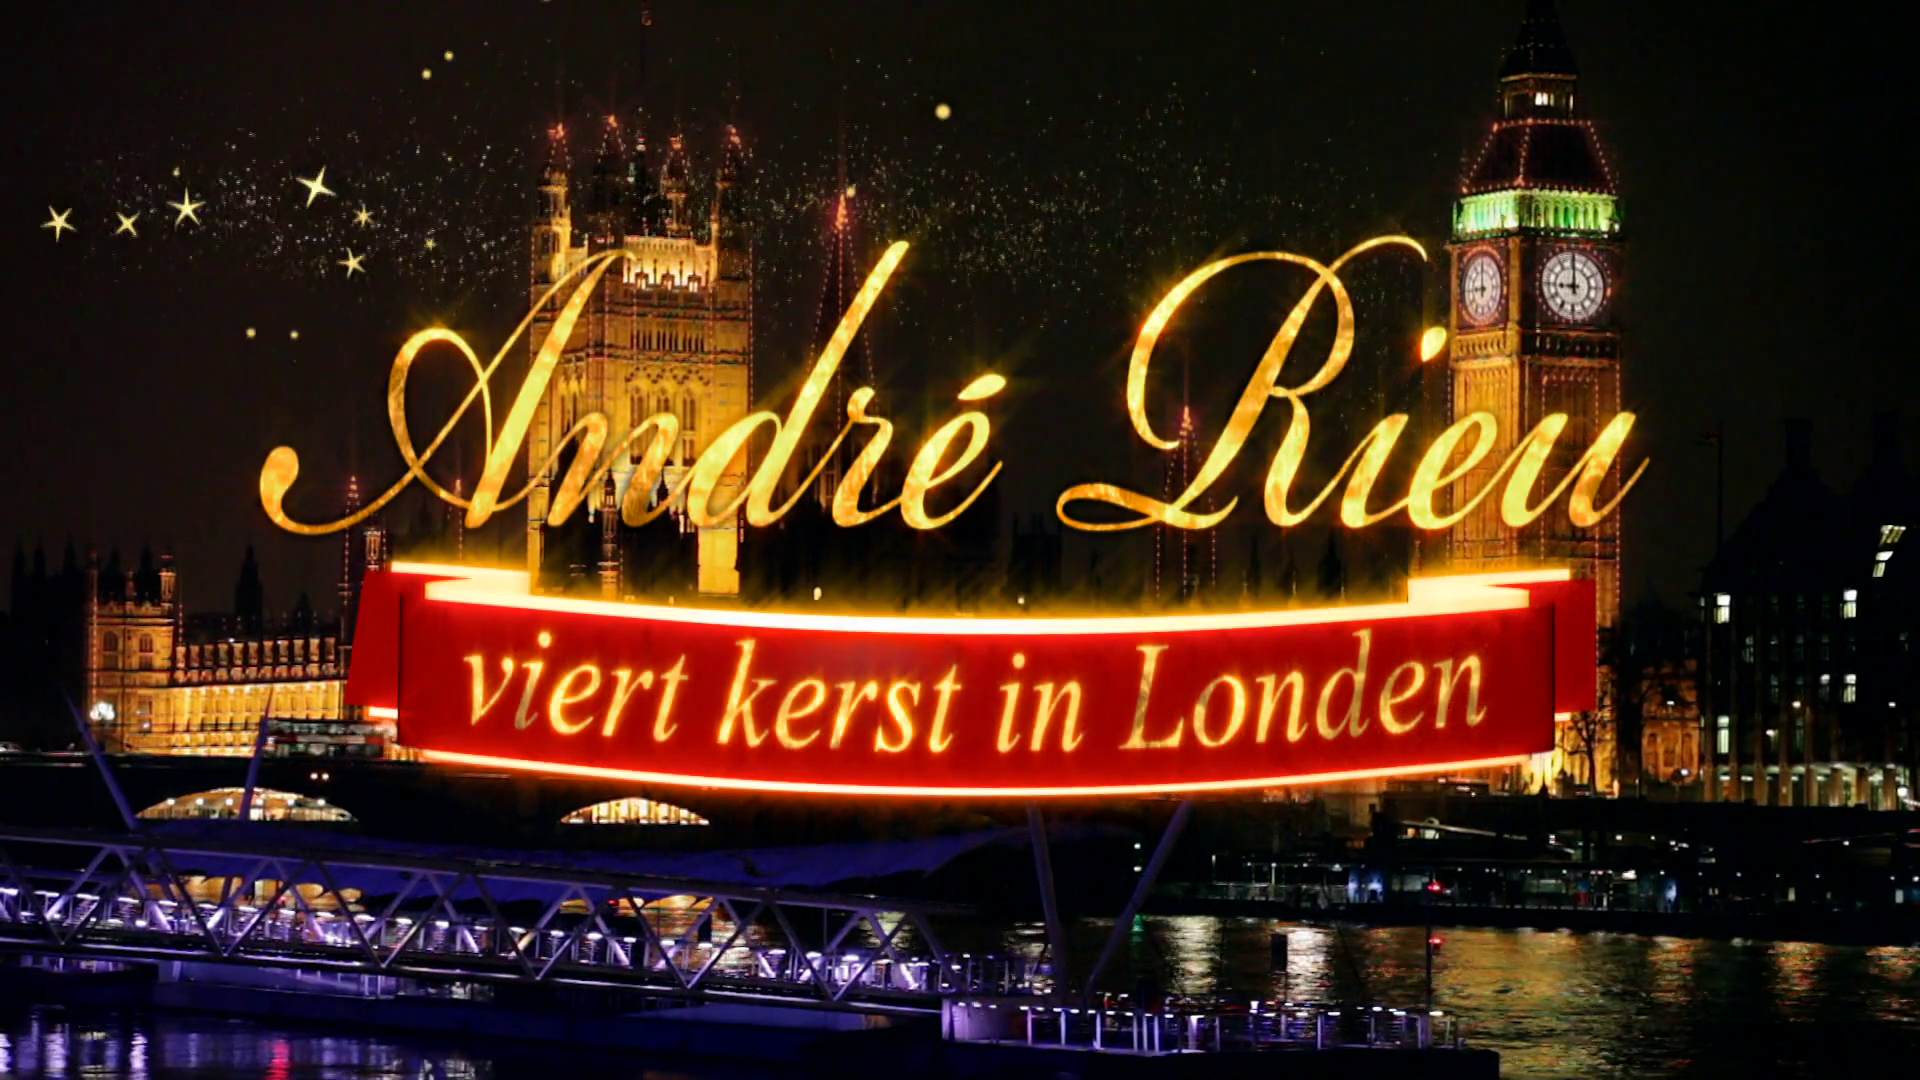 Andre Rieu viert Kerst in Londen NLSUBBED 1080p WEB x264-DDF